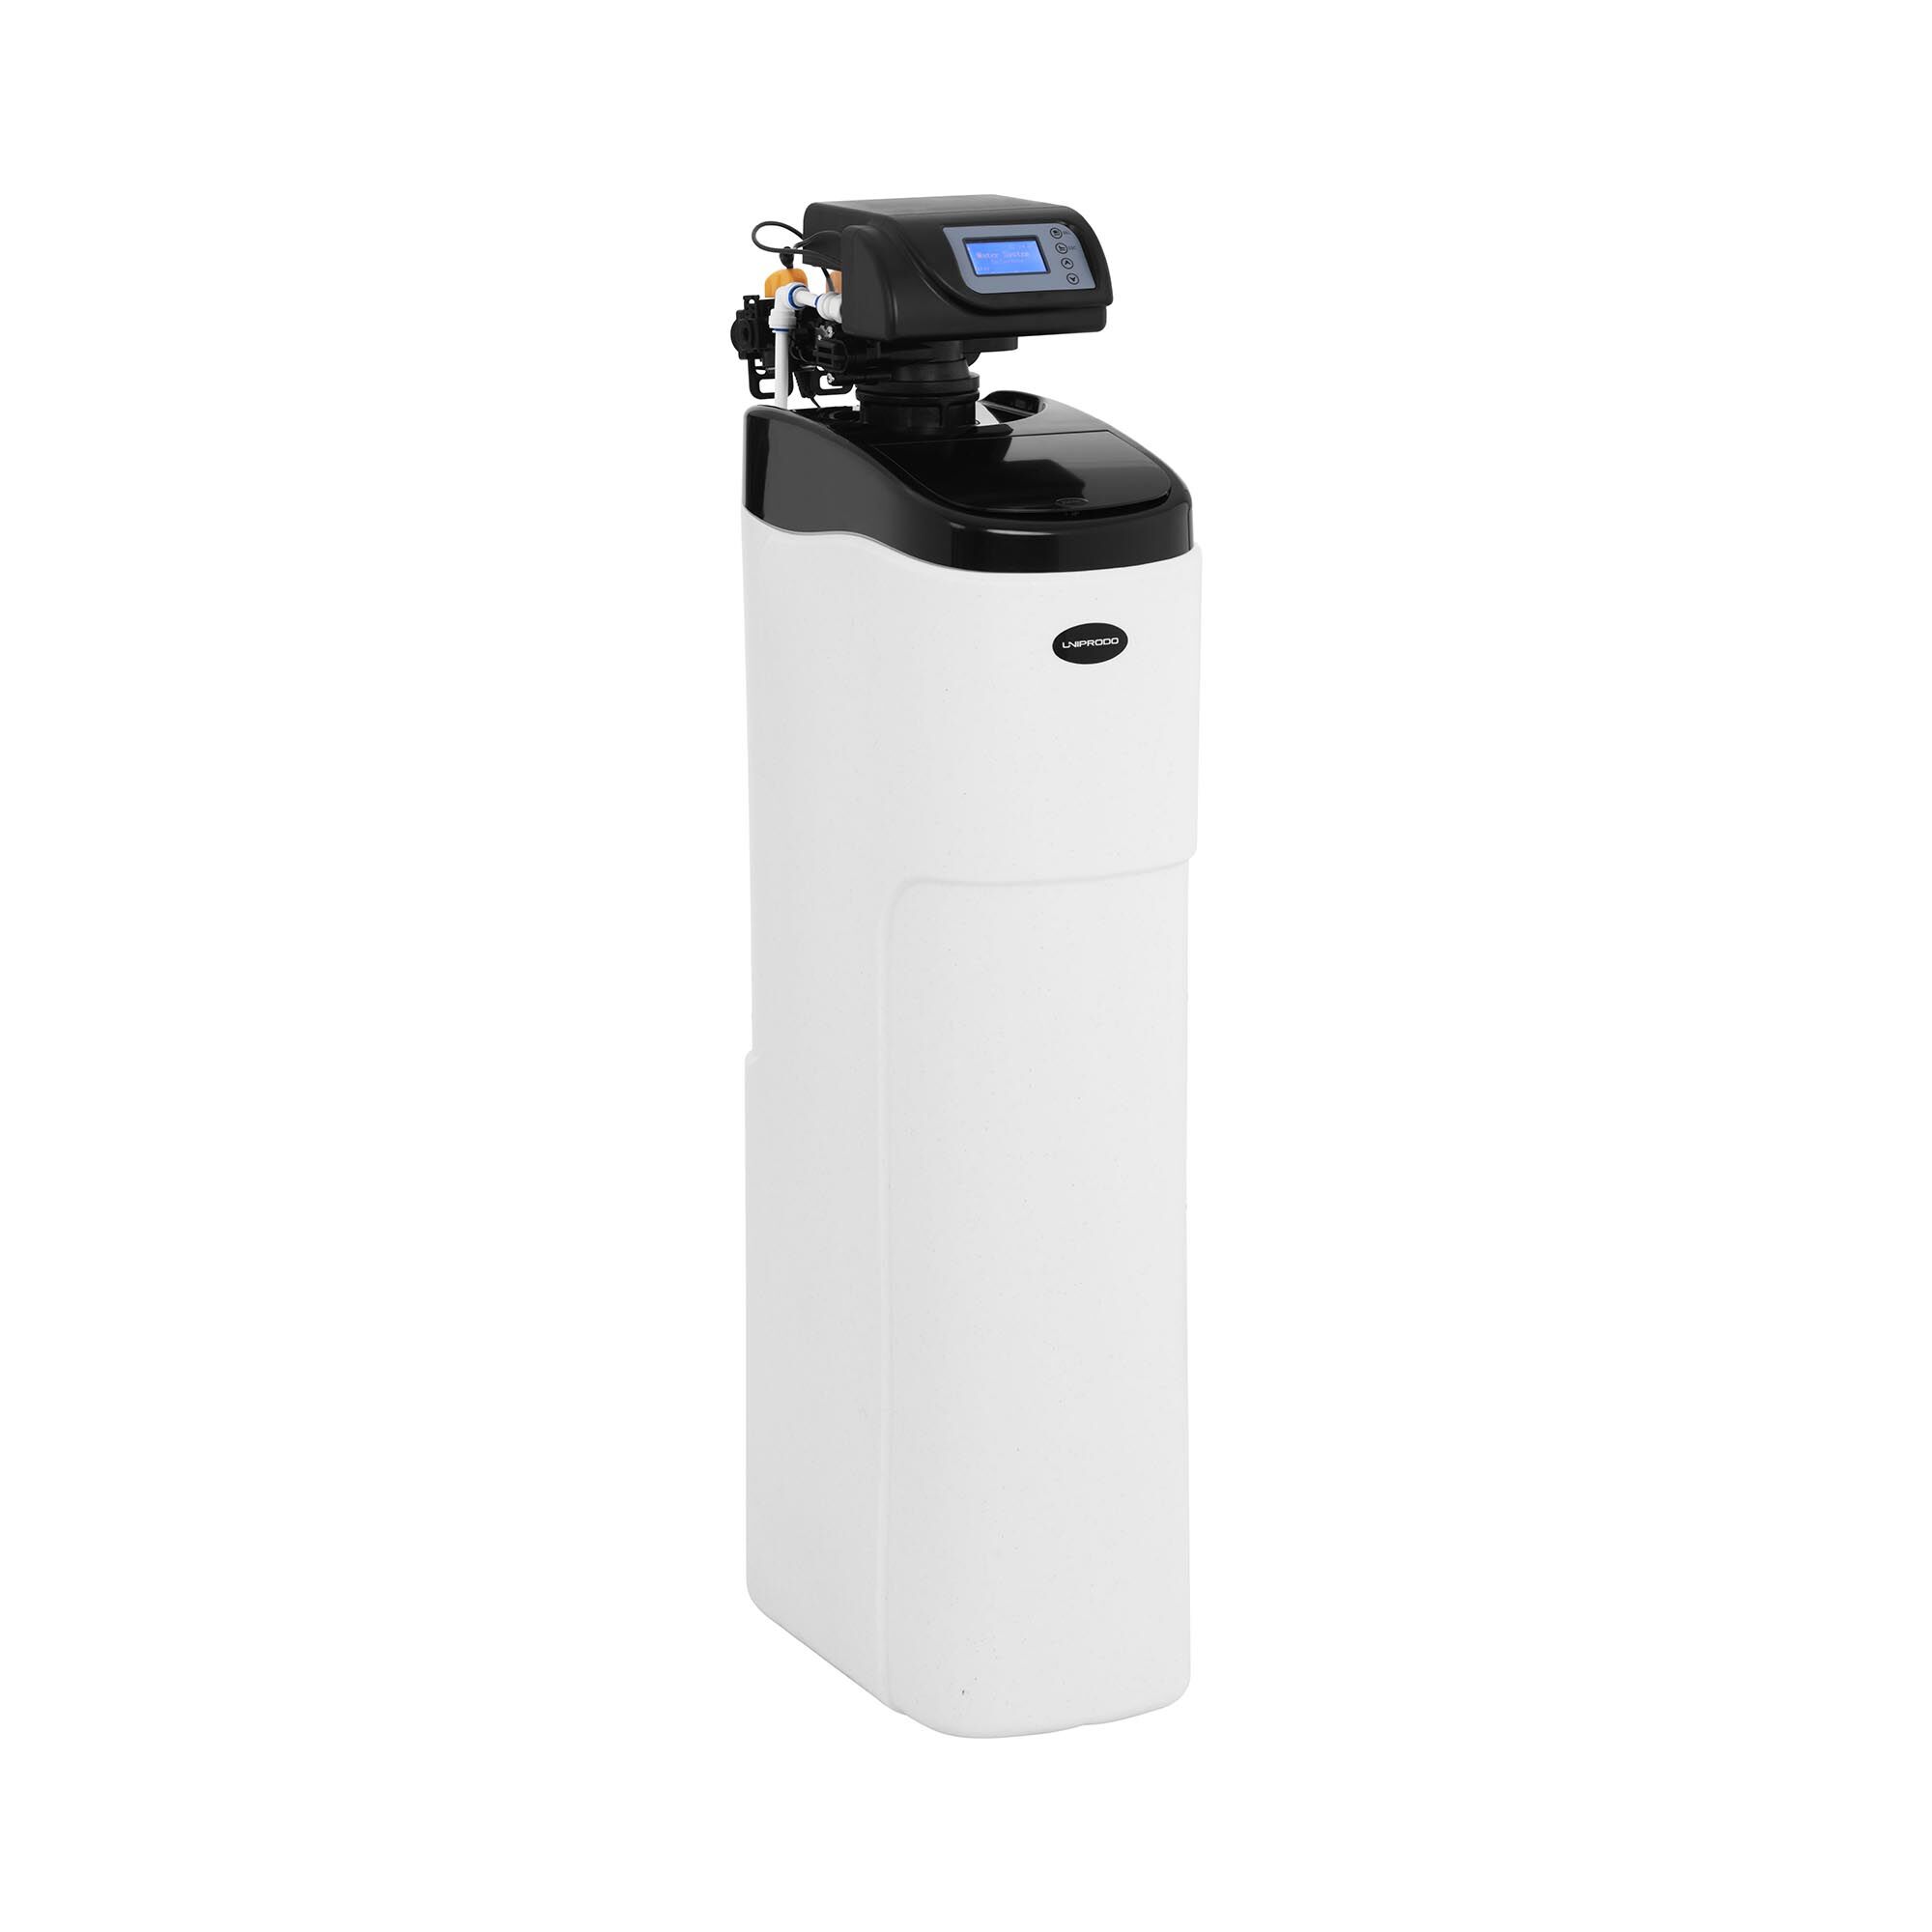 Uniprodo Water Softener System - 2-8 people - 15 L - 1.6-2.9 m³/h UNI_WATERSOFTENER_1500